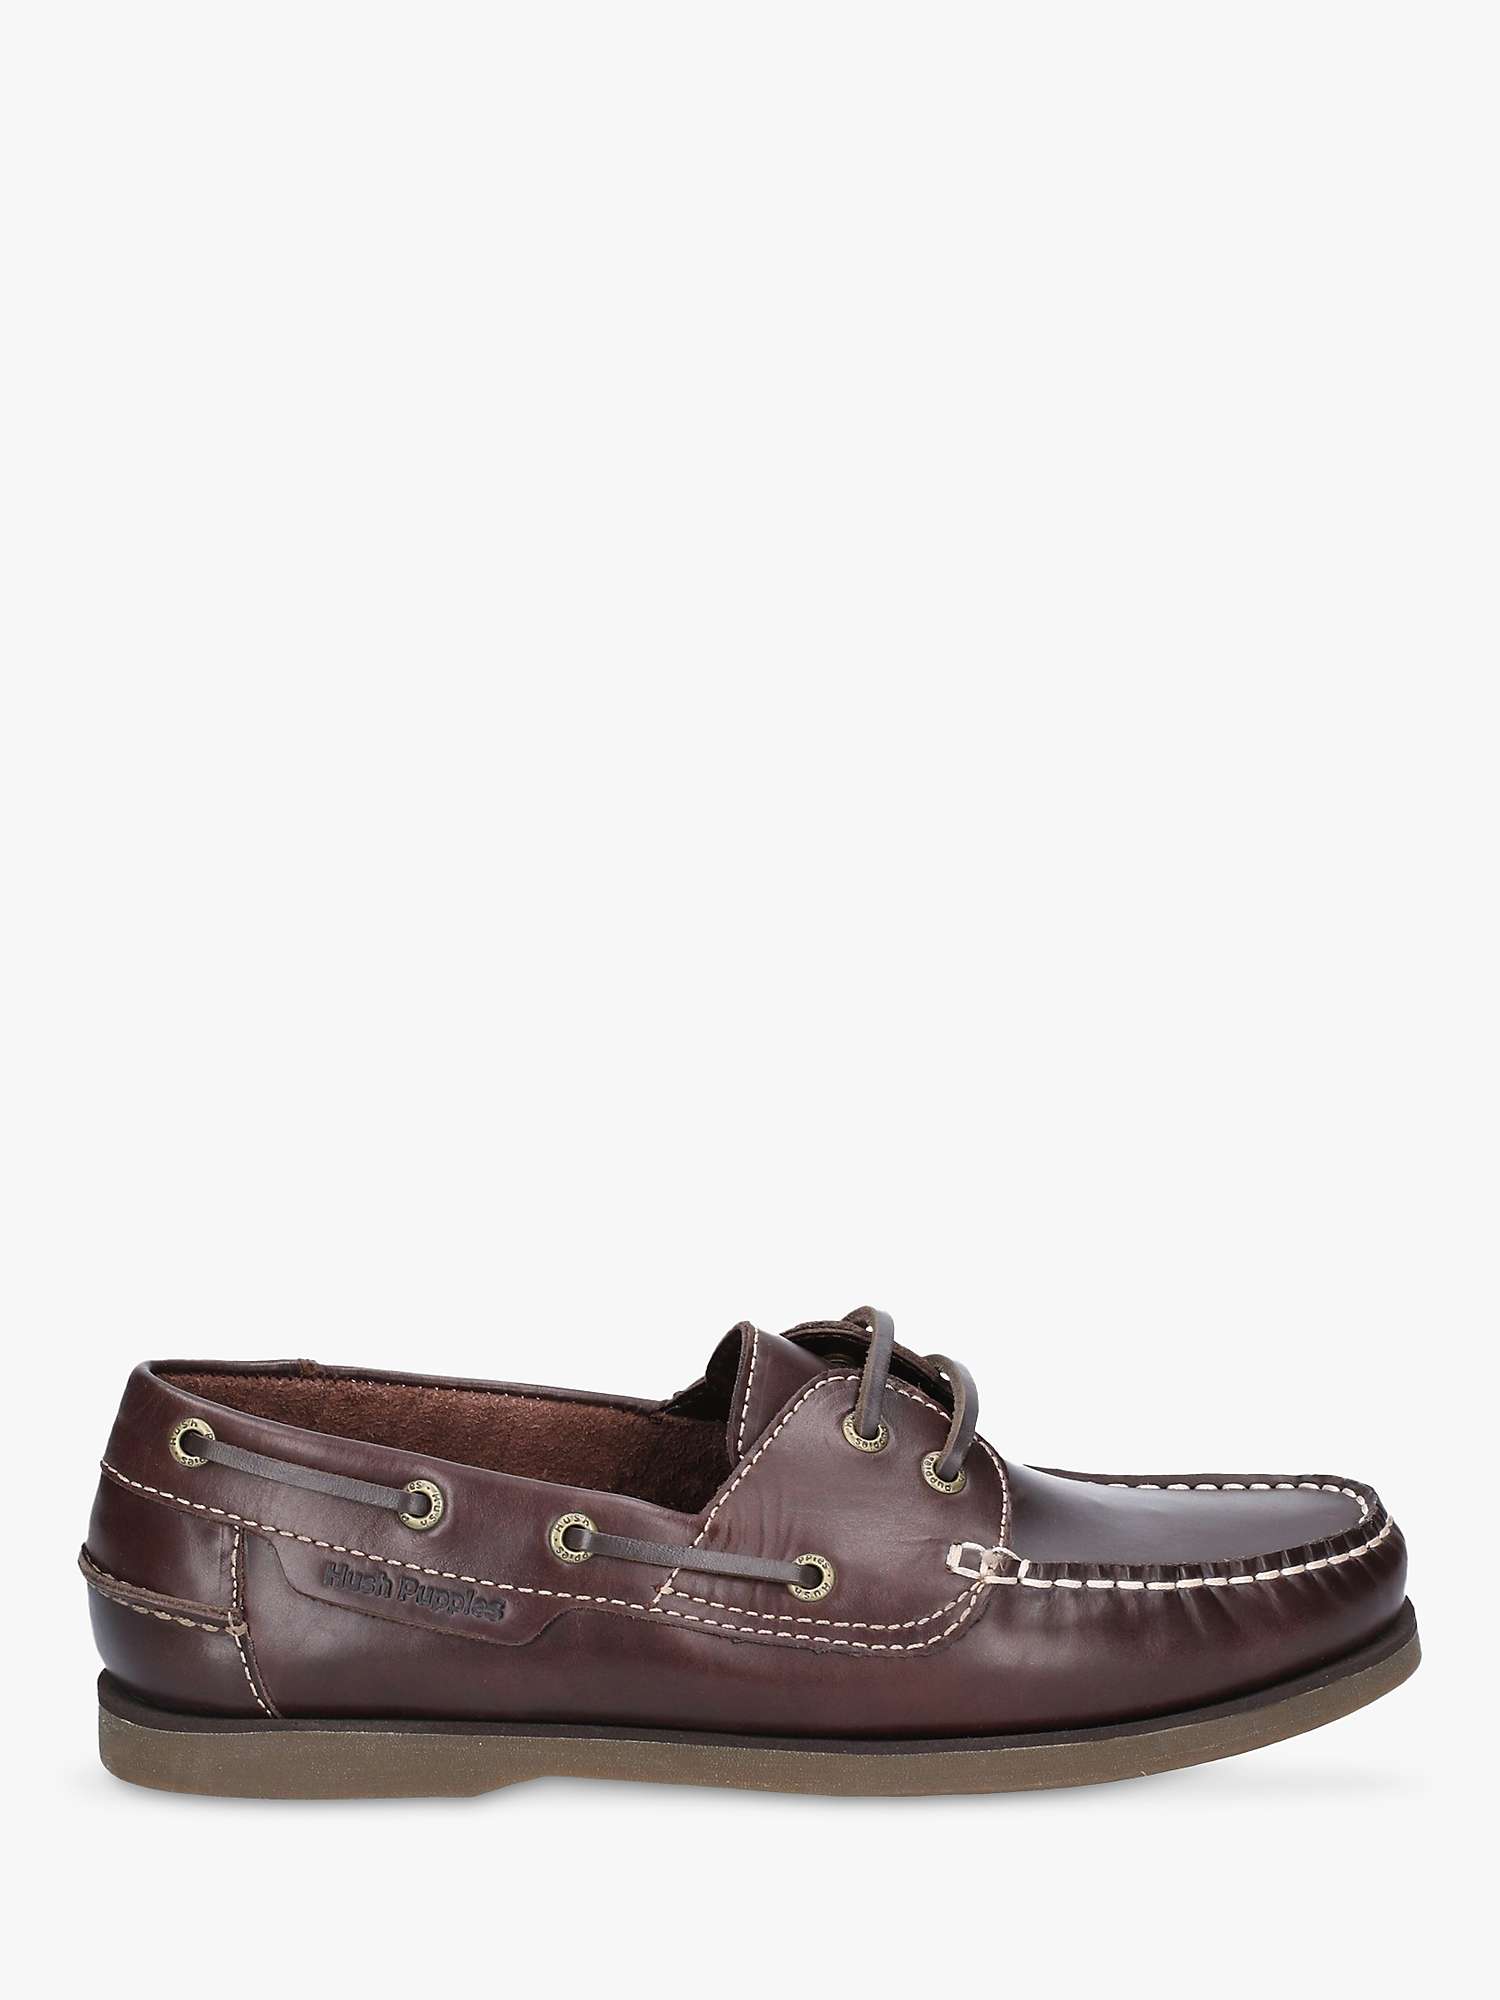 Buy Hush Puppies Henry Leather Boat Shoes Online at johnlewis.com